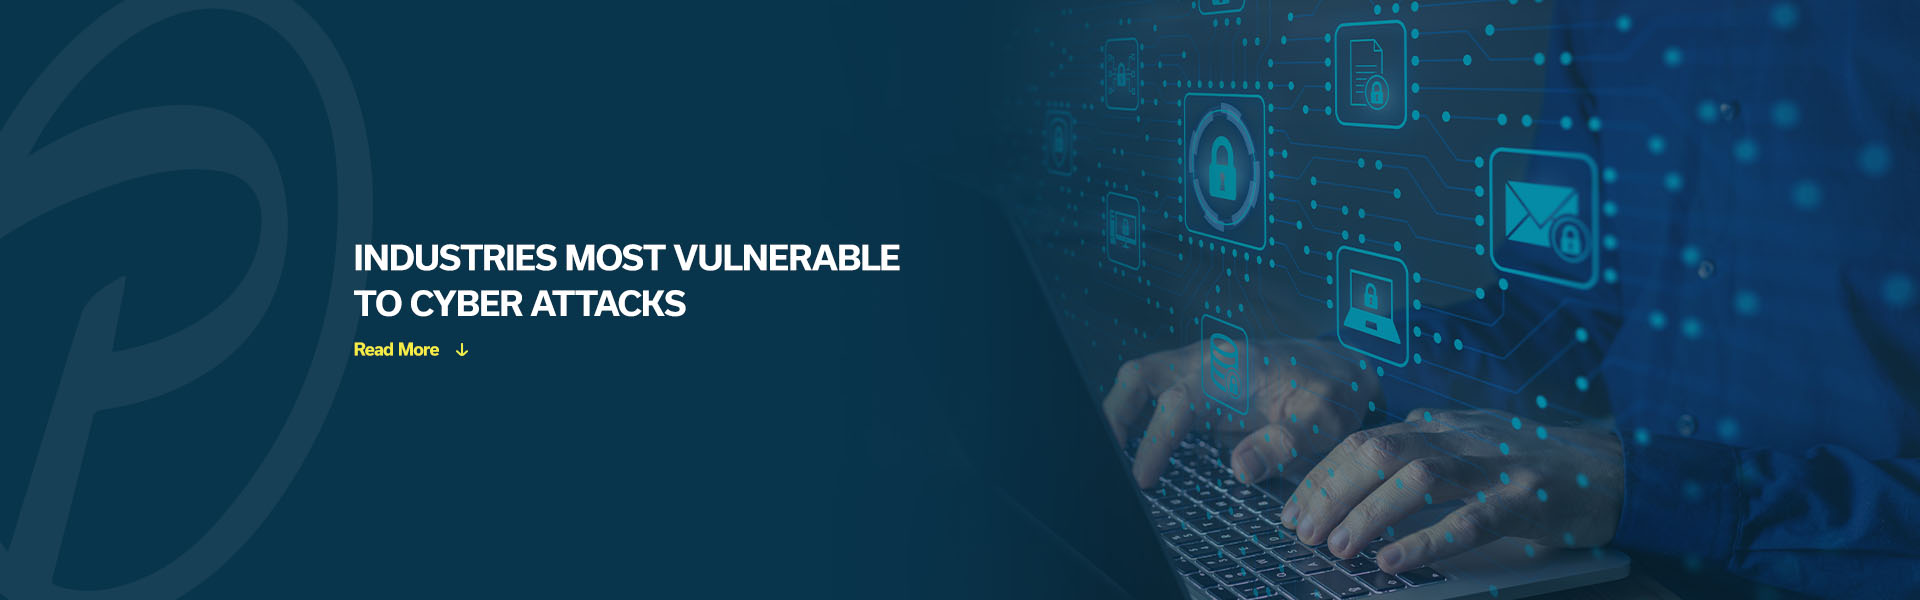 03-industries-most-vulnerable-to-cyber-attacks